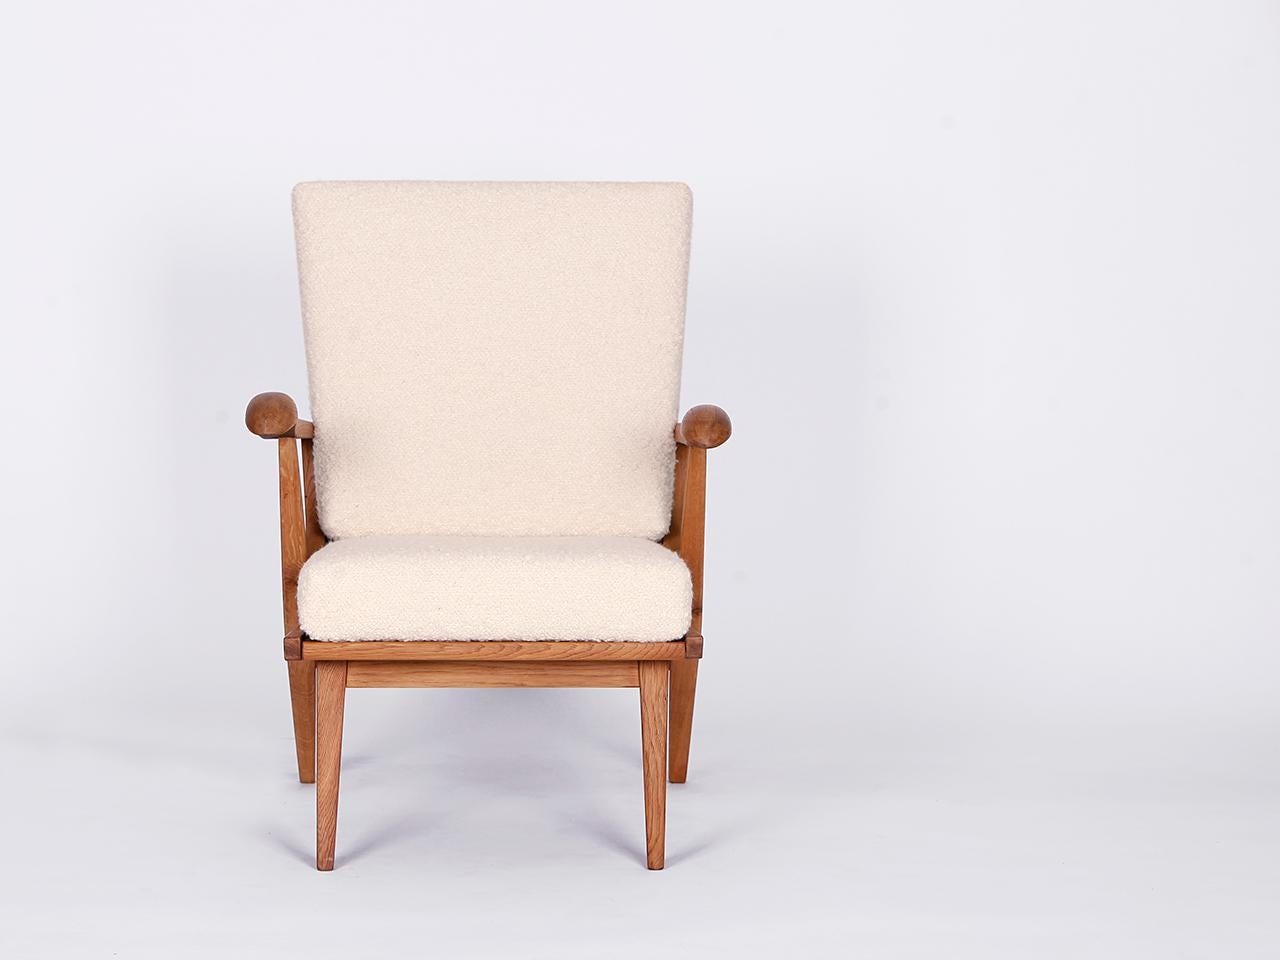 Mid century Boucle armchair from the 1960s, manufactured in former Czechoslovakia. Newly varnished wooden parts, solid coconut fiber upholstery. Fully restored. With a wonderfully soft english cover boucle fabric made of wool. This completely